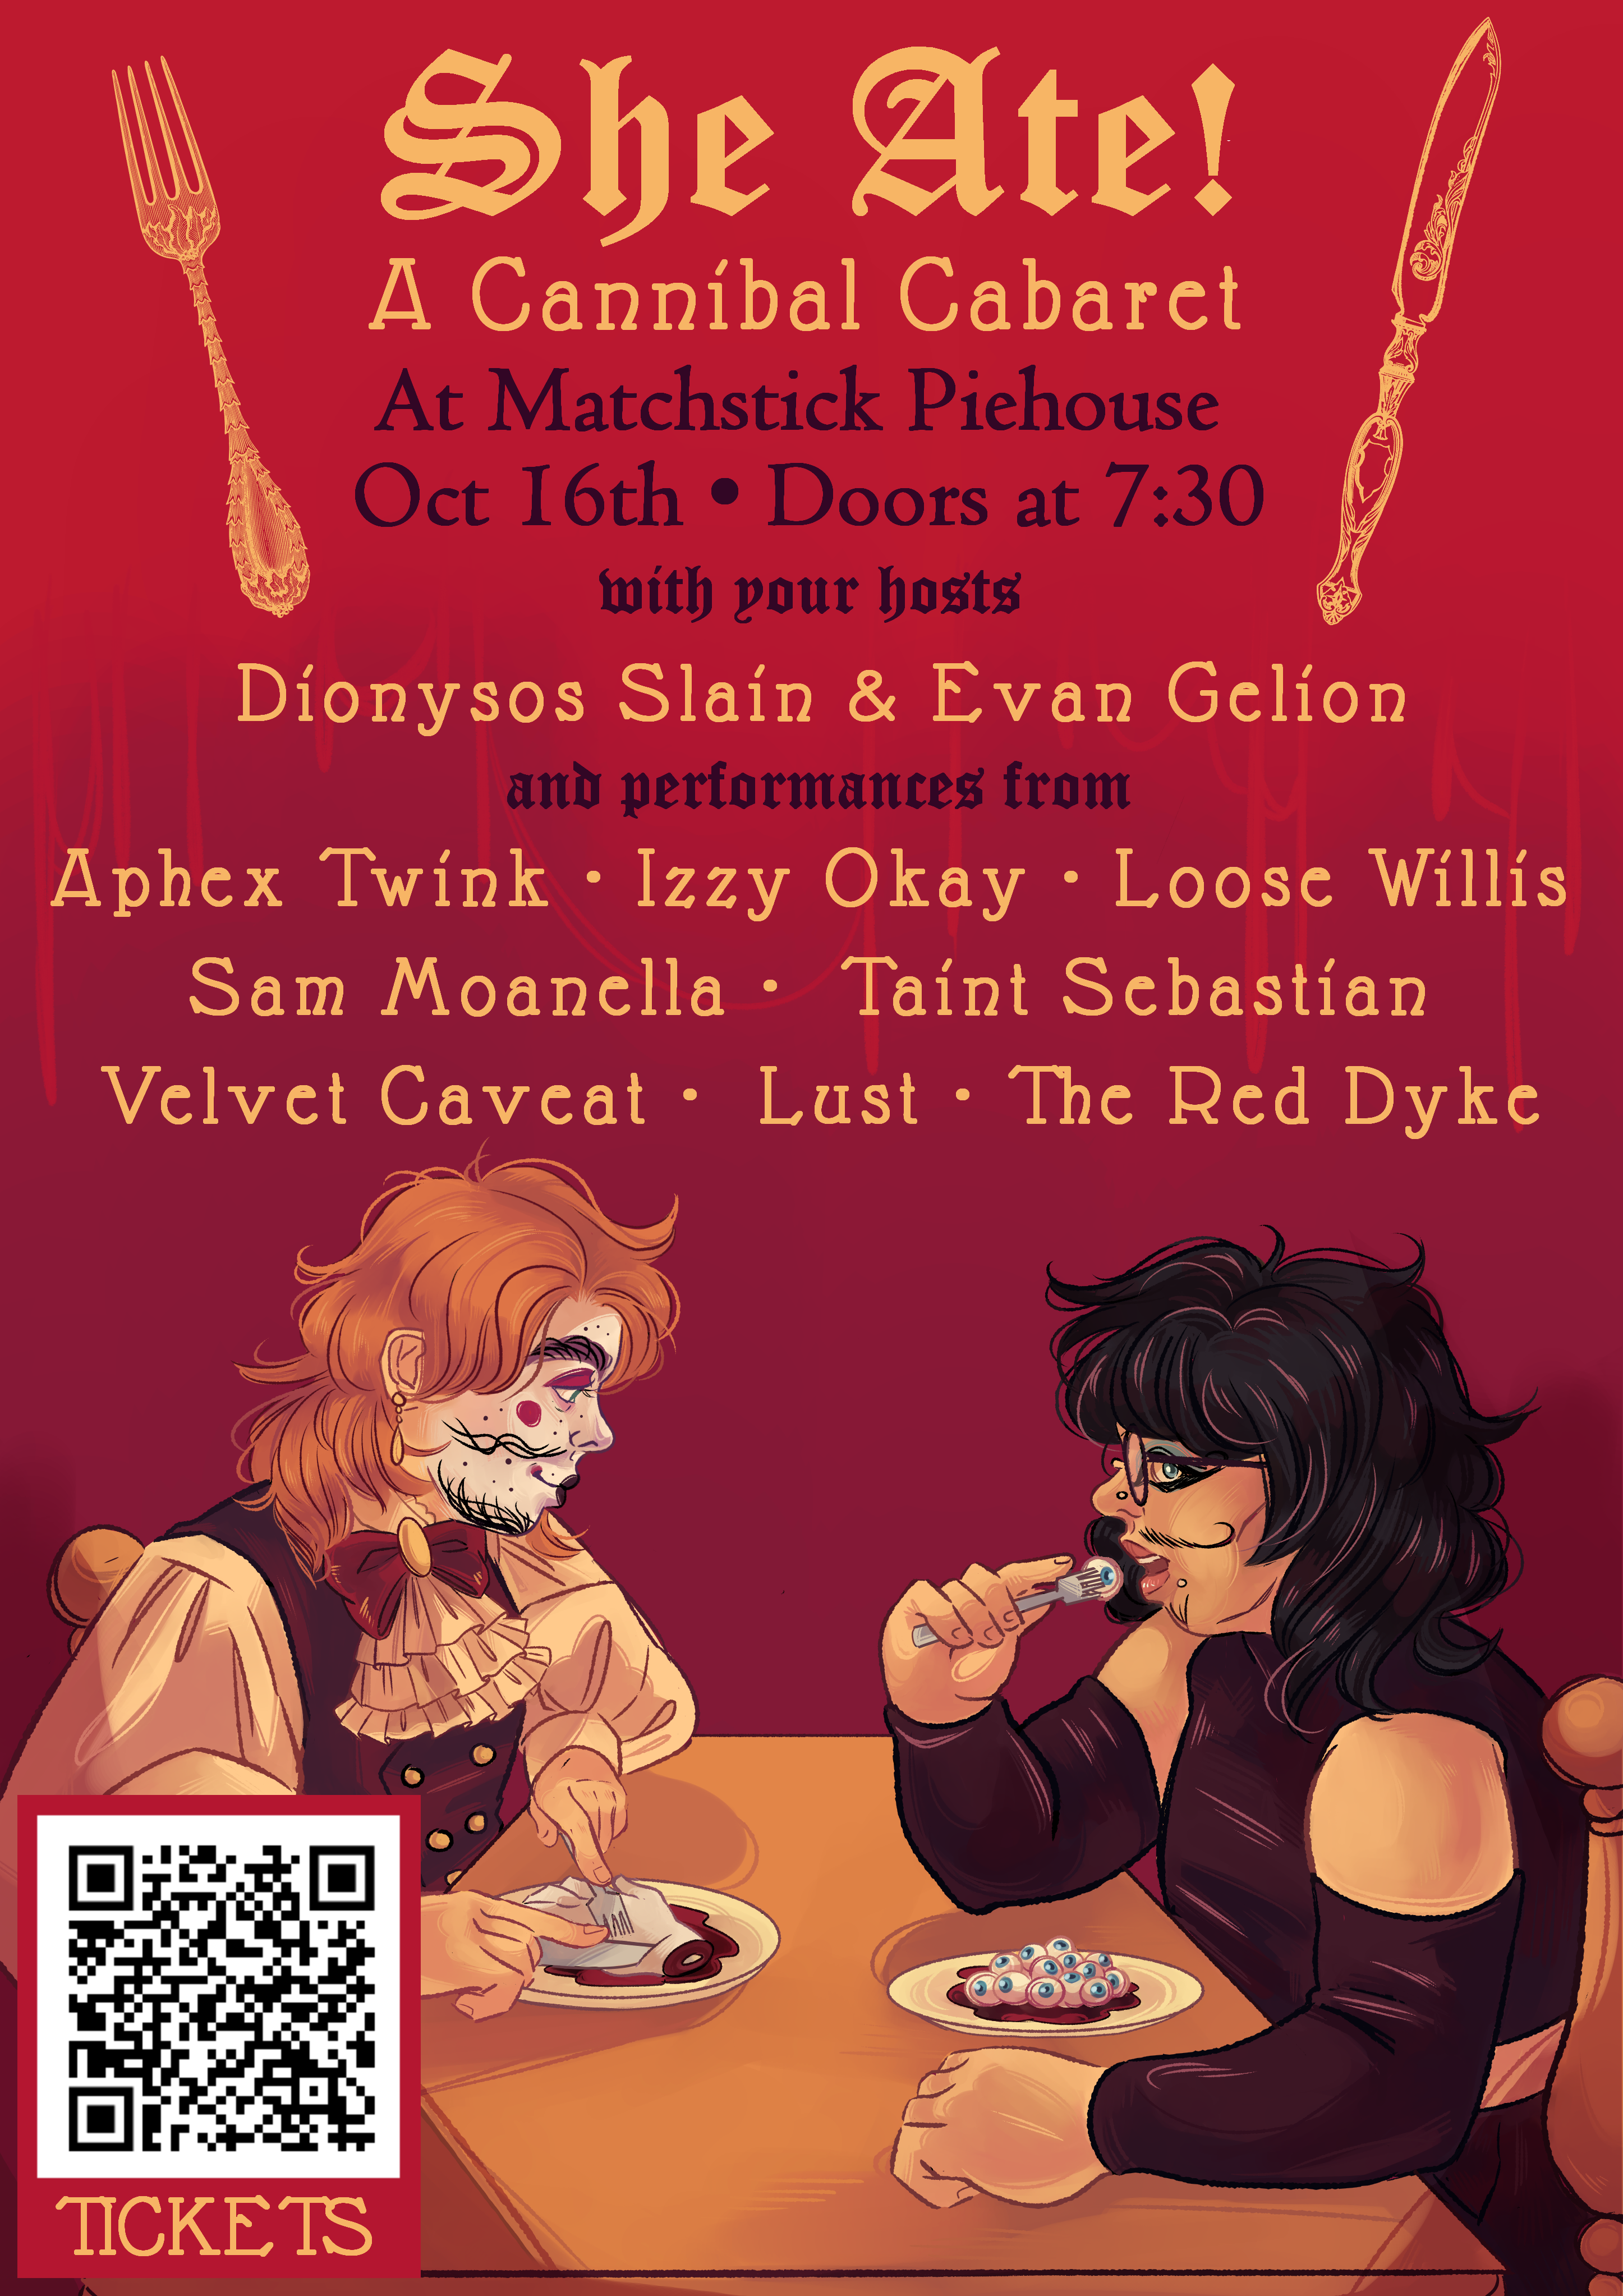 She Ate: A Cannibal Cabaret at Matchstick Piehouse, October 17th, doors at 7:30. With your hosts, Dionysos Slain and Evan Gelion, and performances from Aphex Twink, Izzy Okay, Loose Willis, Sam Moanella, Taint Sebastian, Velvet Caveat, Lust, and The Red Dyke. Below is an illustration of Dionysos Slain and Evan Gelion sitting at a table and having a nice meal of eyeballs and a human hand.